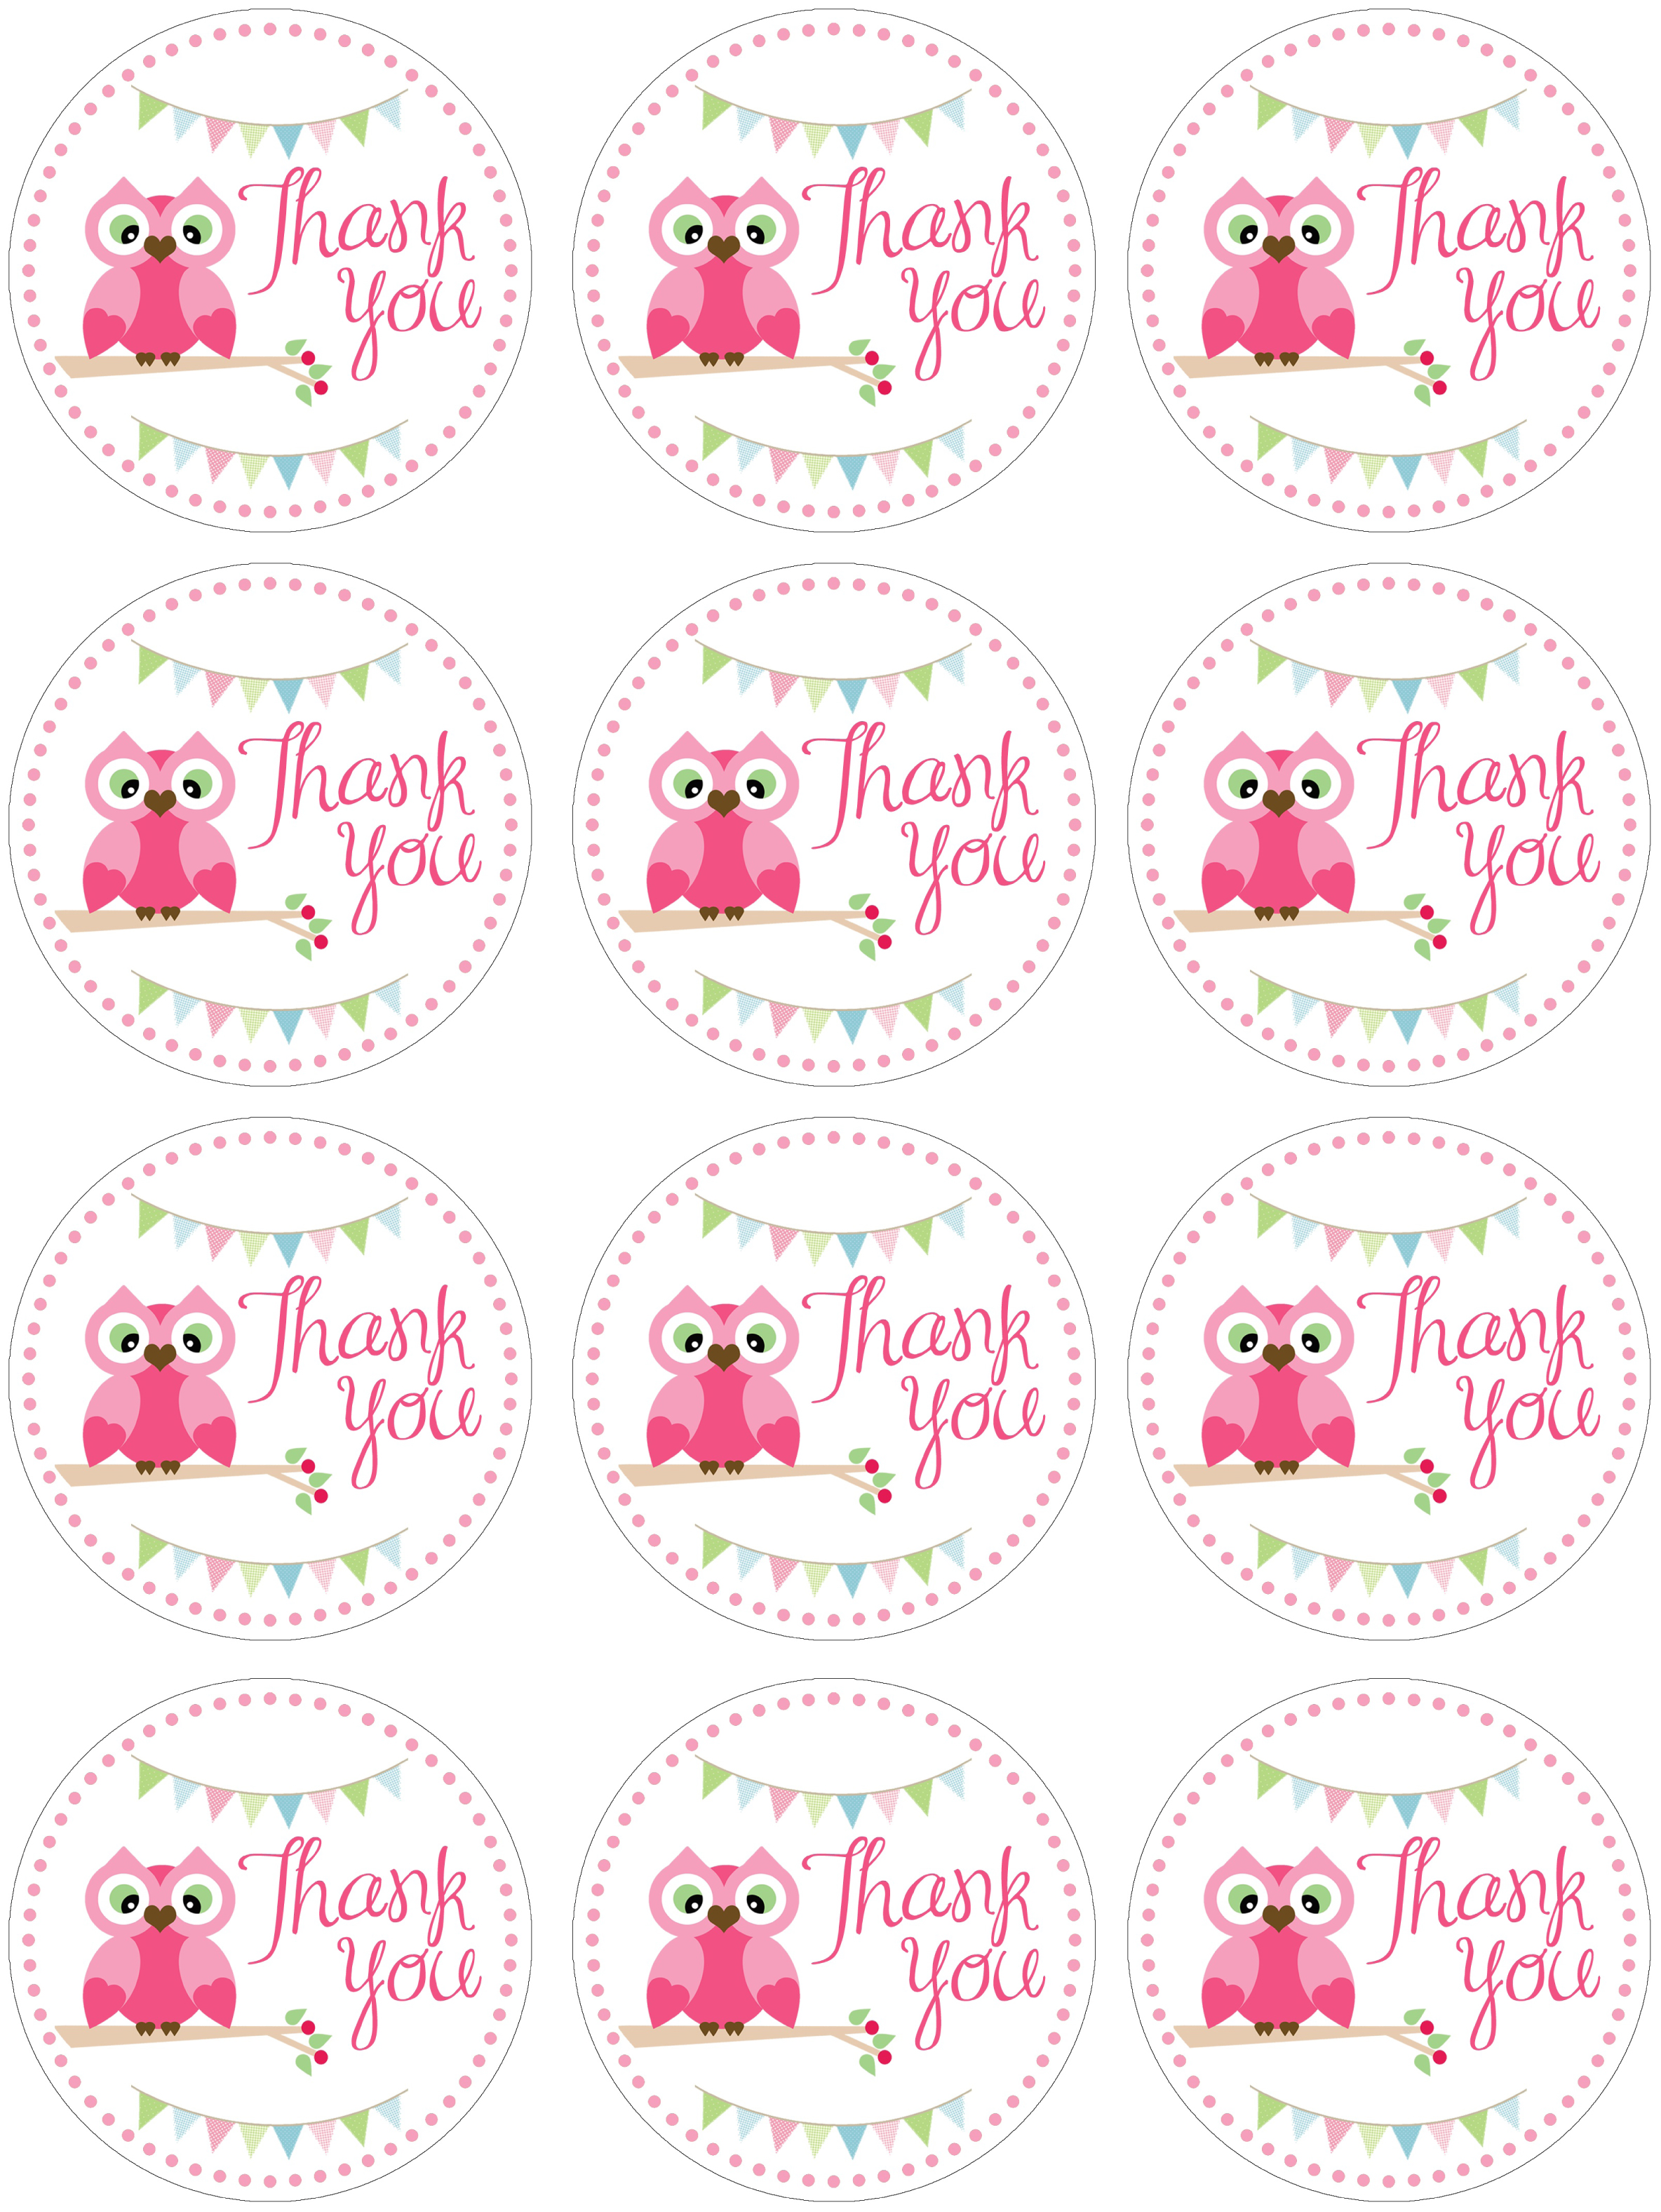 free-printable-tags-thank-you-sticker-template-thank-you-stickers